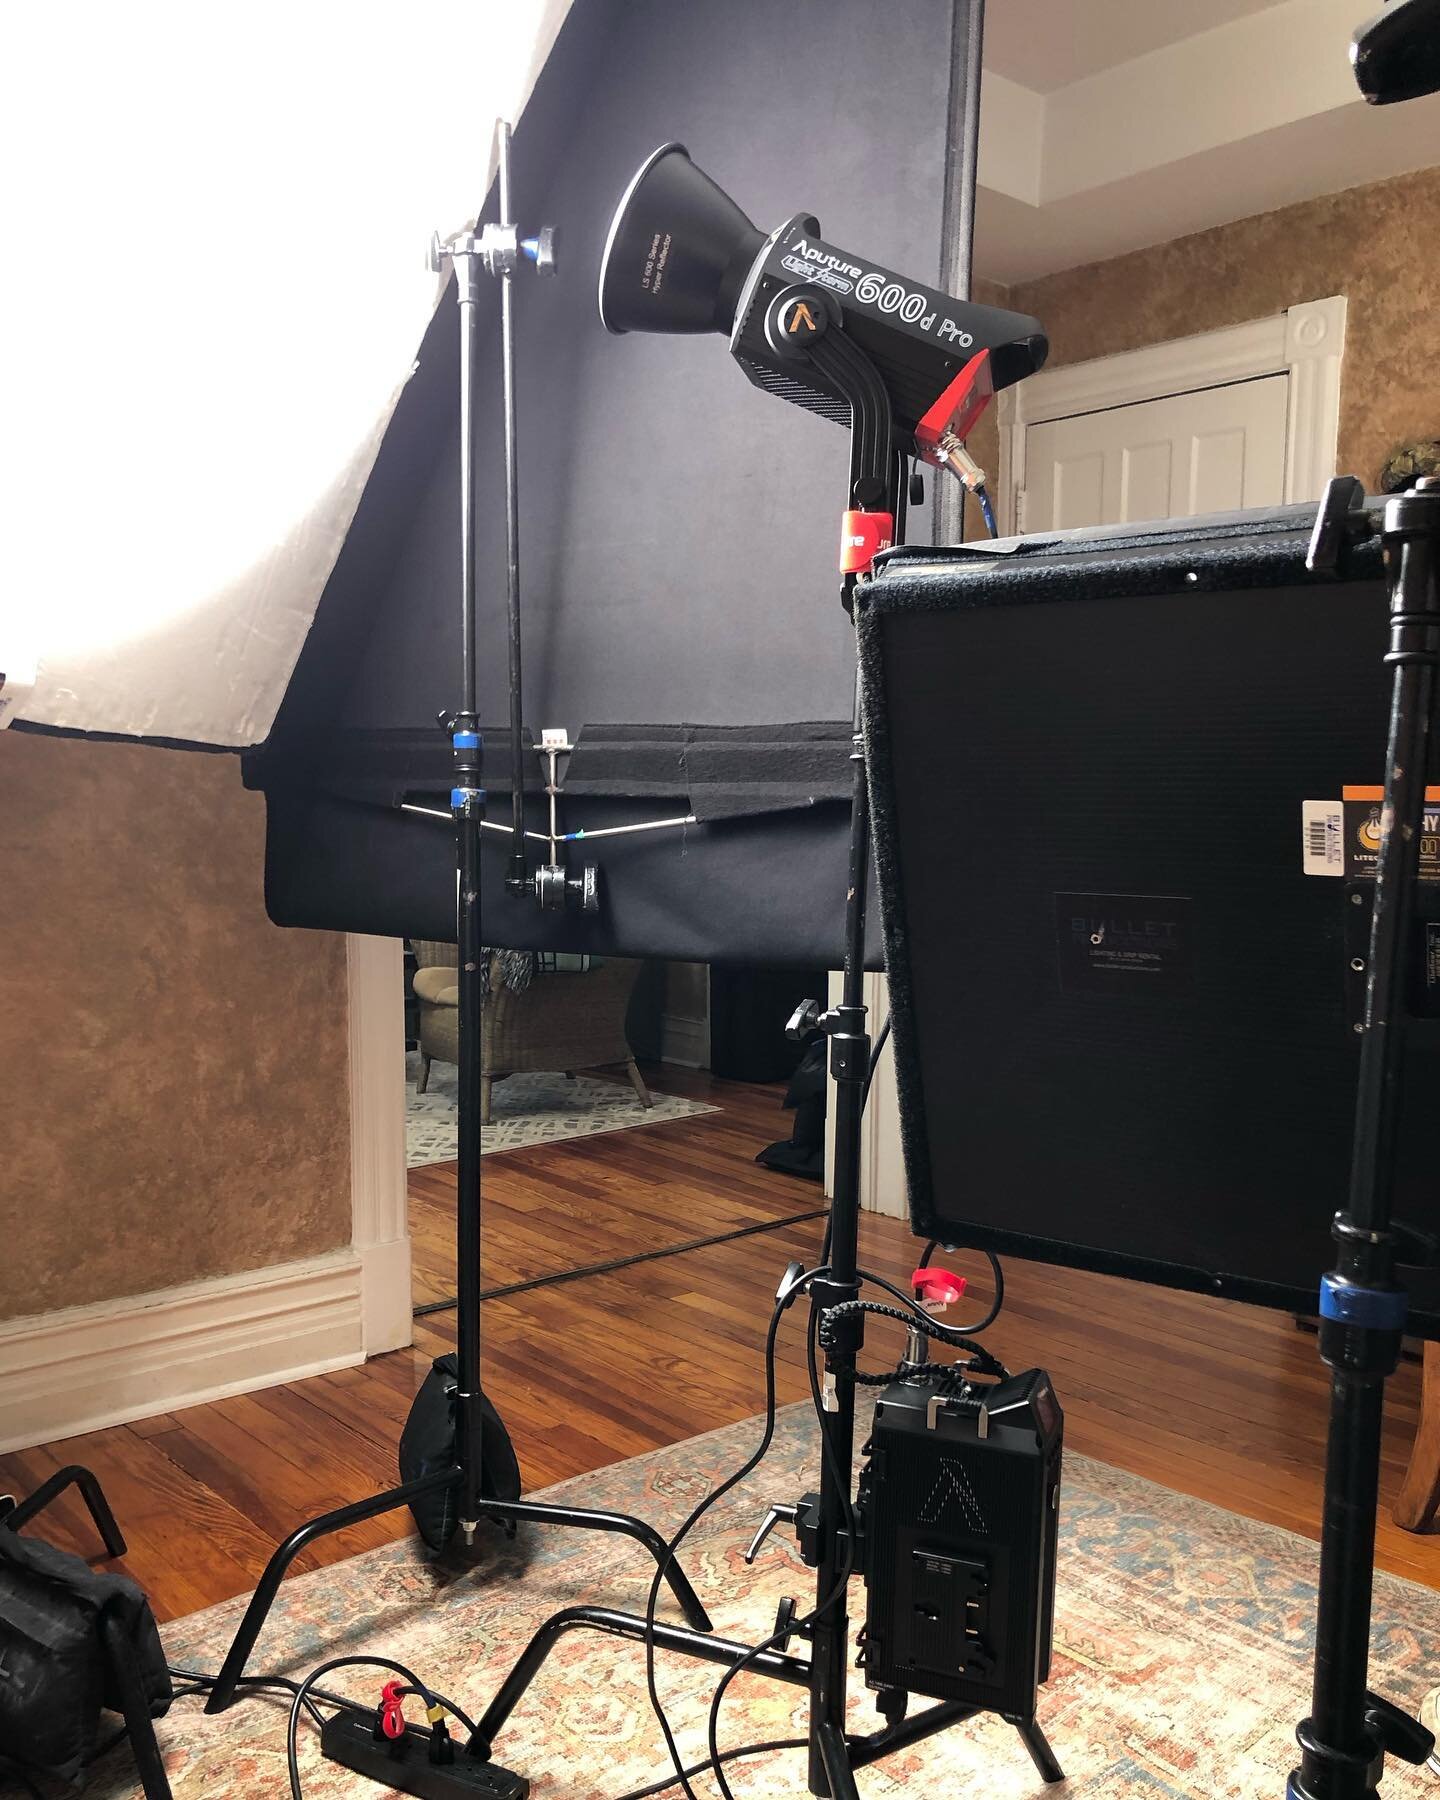 Aputure 600Ds first day on set! Along with her sisters @litegear @asteraofficial @aputure.lighting #aputure #gaffer #lighting #yesterdaysoffice